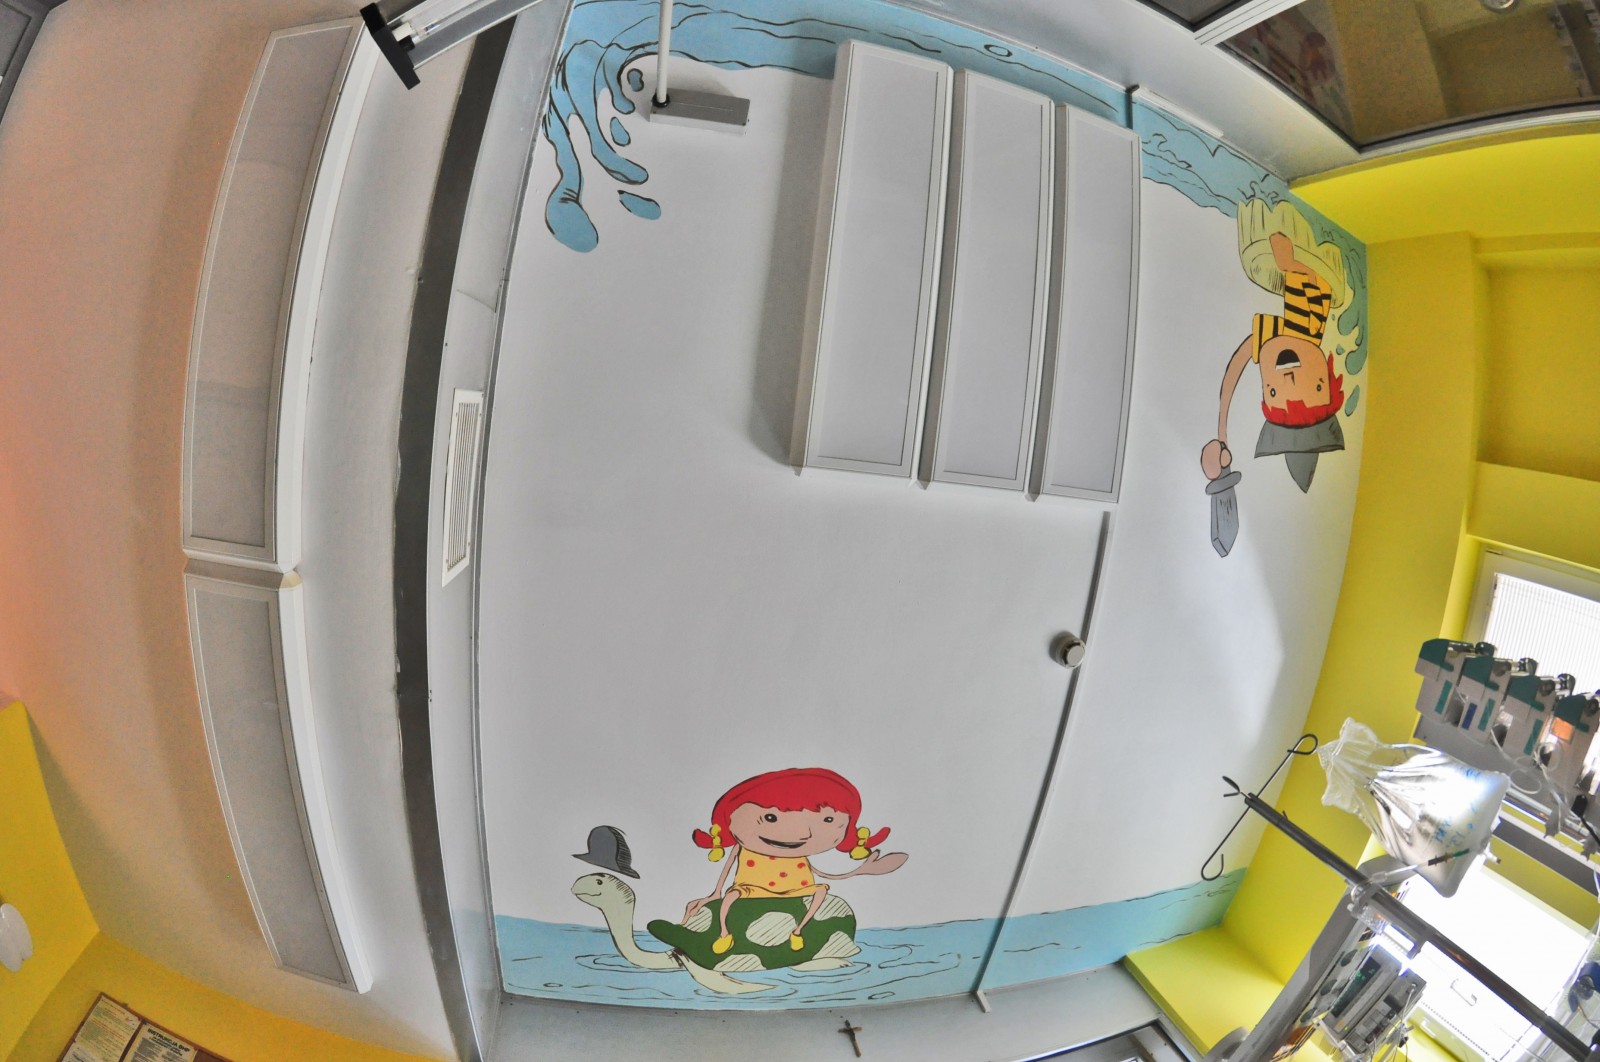 Drawings on the ceiling Ceiling Operation in The Children's Memorial Health Institute in Warsaw | Ceiling Operation - The Children’s Memorial Health Institute | CSR | About us